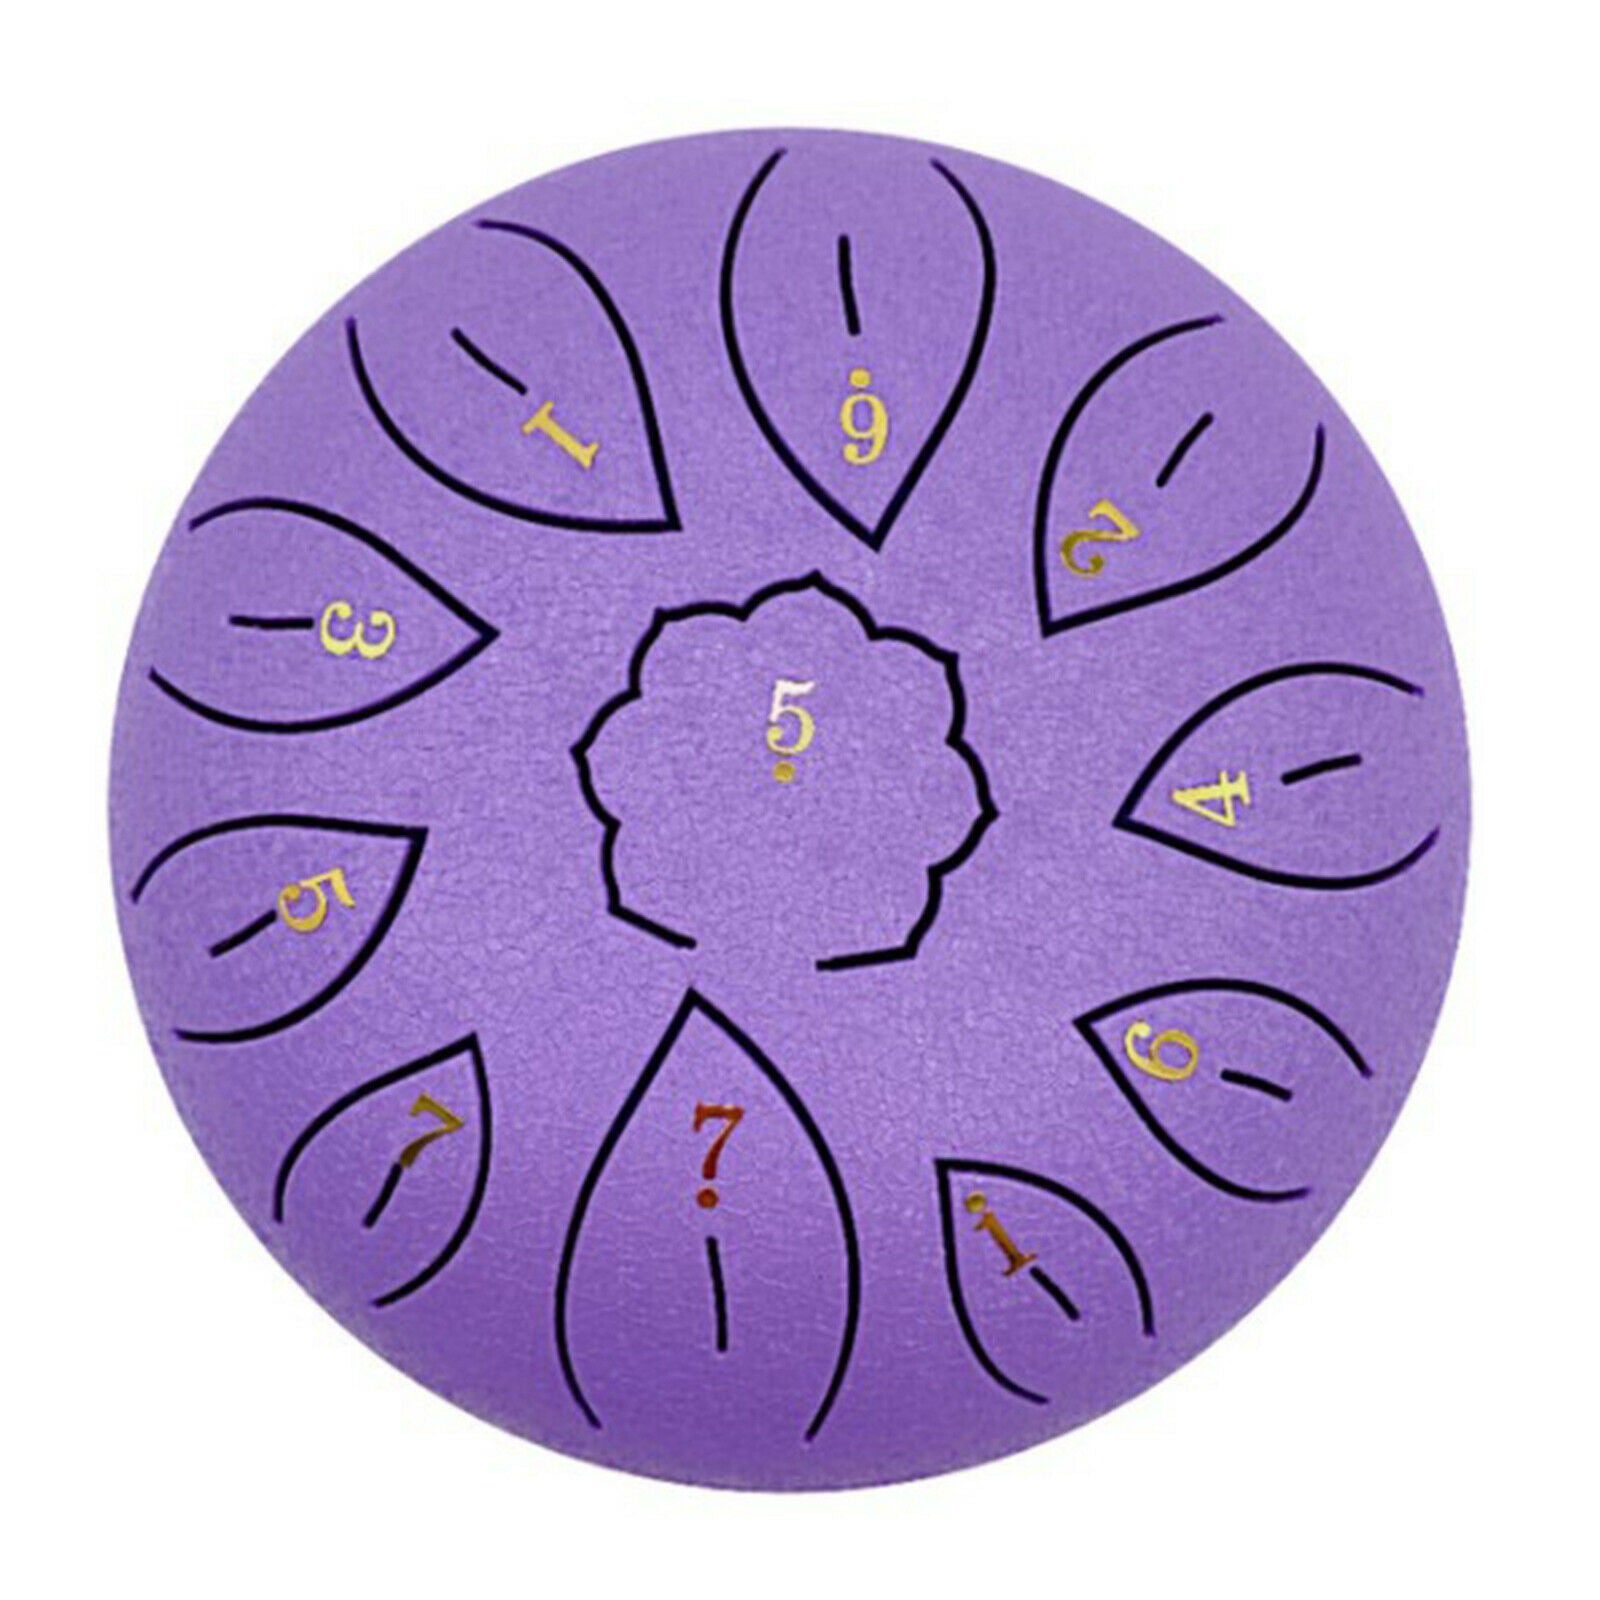 Mini 11 Tone 6" Steel Tongue Drum and Travel Bag Gift for Boys Girls purple